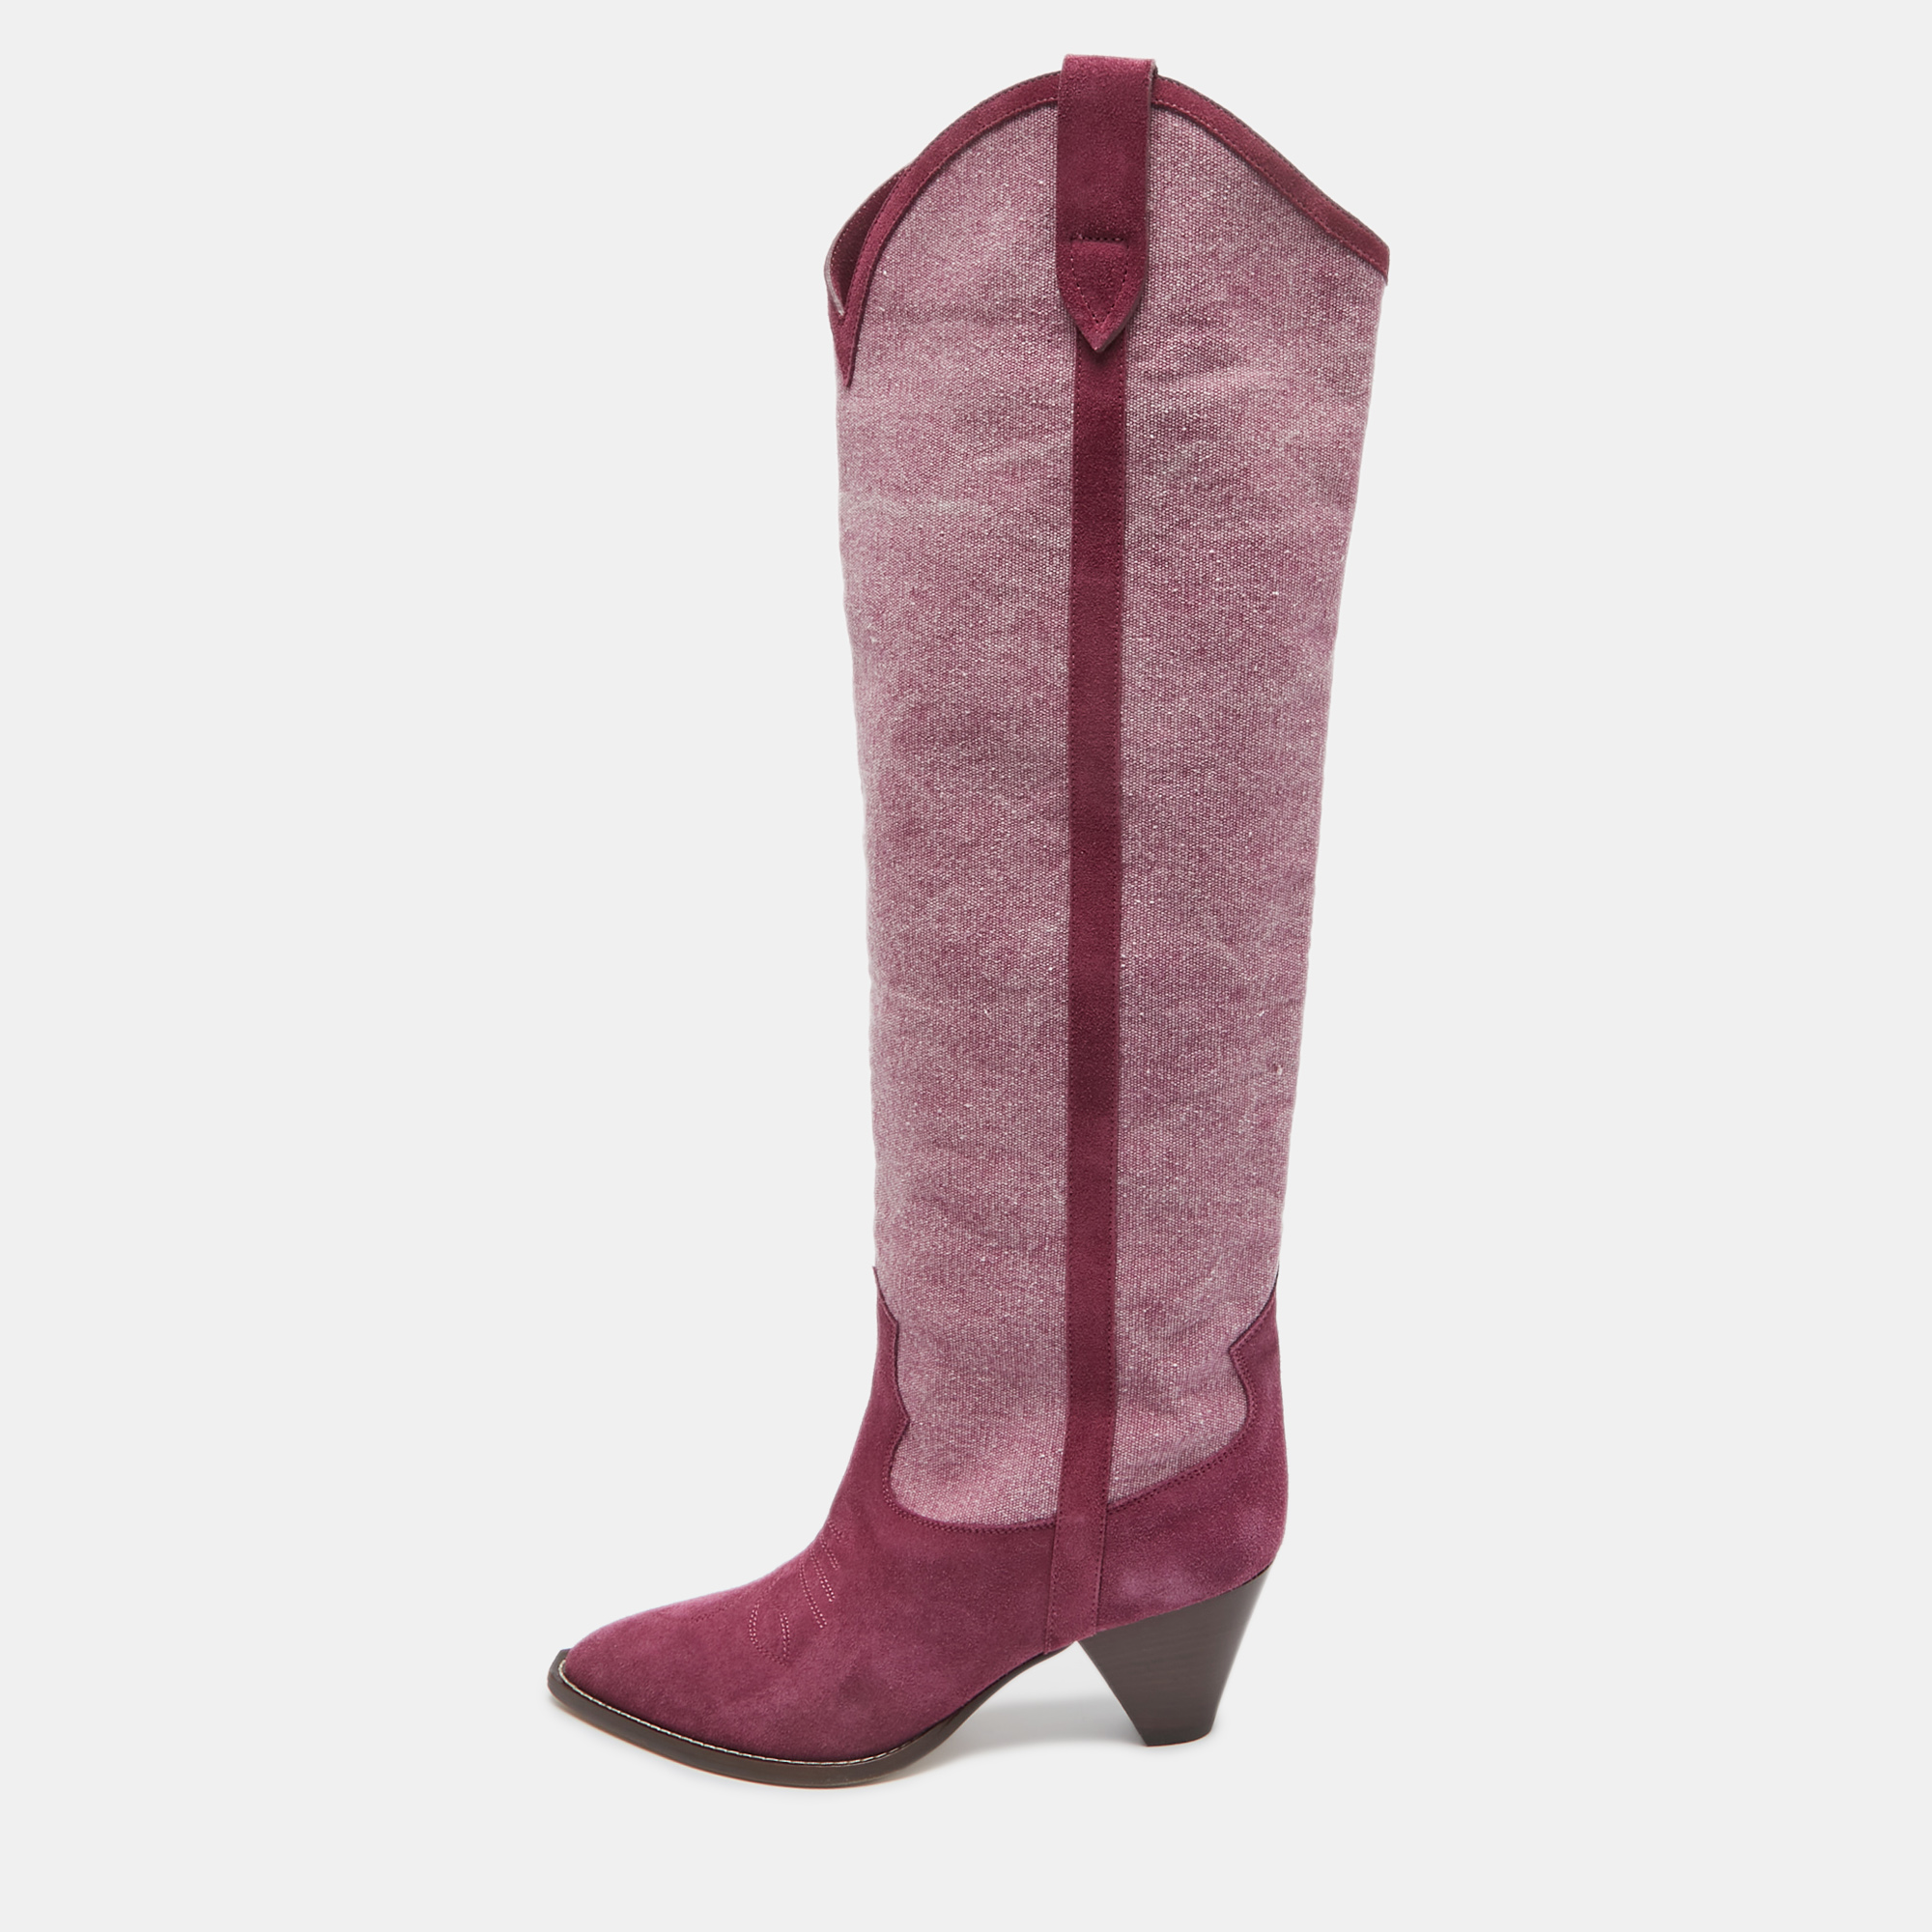 Isabel marant pink suede and canvas knee length boots size 38